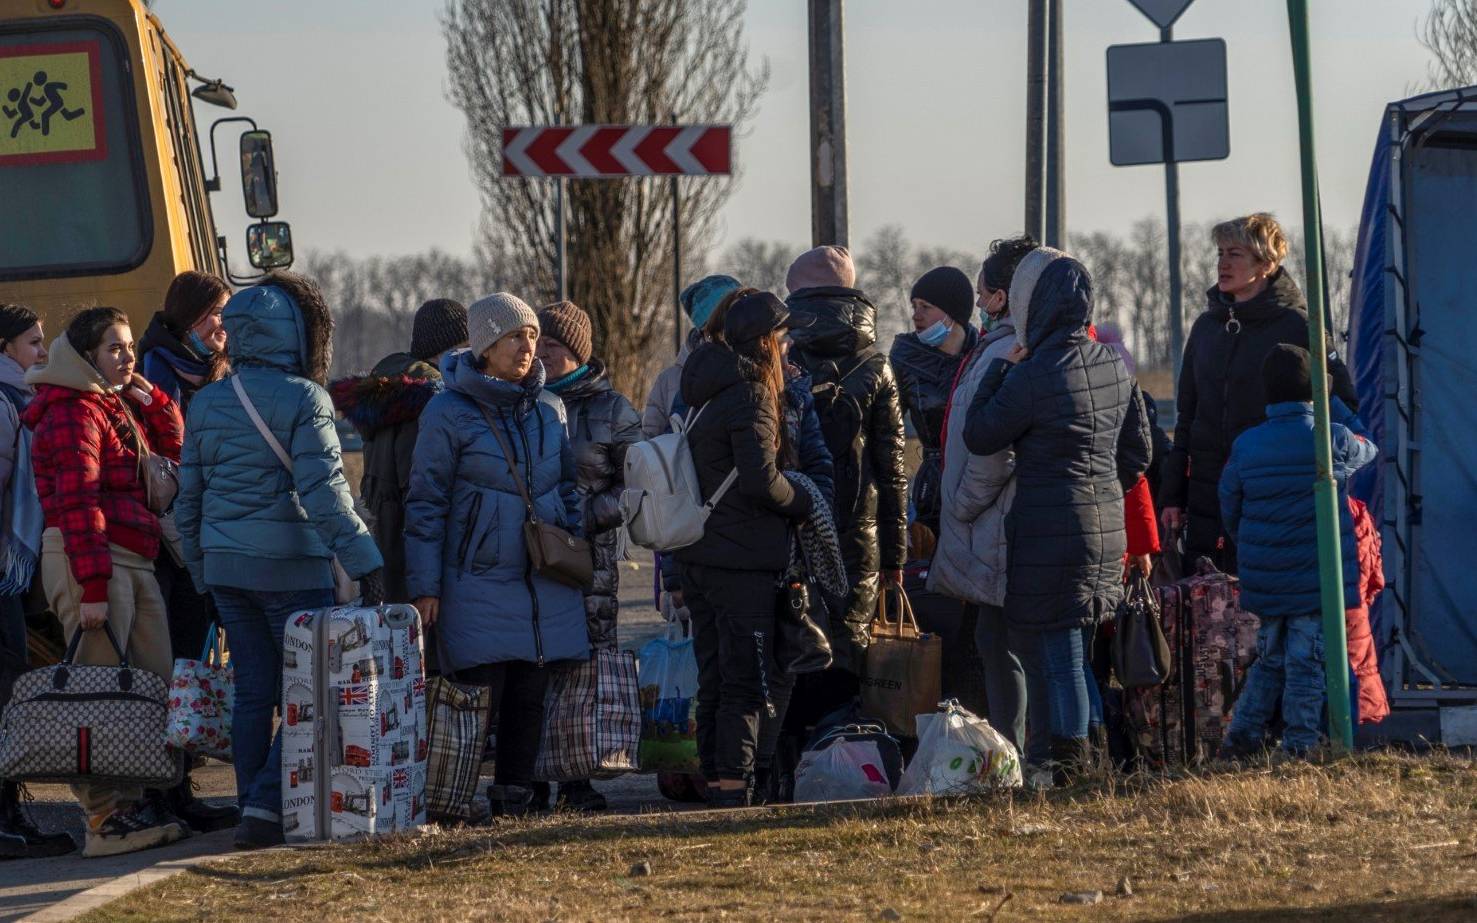 People evacuated from the self-proclaimed Donetsk People's Republic walk toward the Russian Emergency Ministry camp in the village of Veselo-Voznesenka on the Azov Sea coast, on February 19, 2022. - A Russian region bording Ukraine declared a state of emergency on February 19, 2022, citing growing numbers of people arriving from separatist-held regions in Ukraine after they received evacuation orders. (Photo by Andrey BORODULIN / AFP)